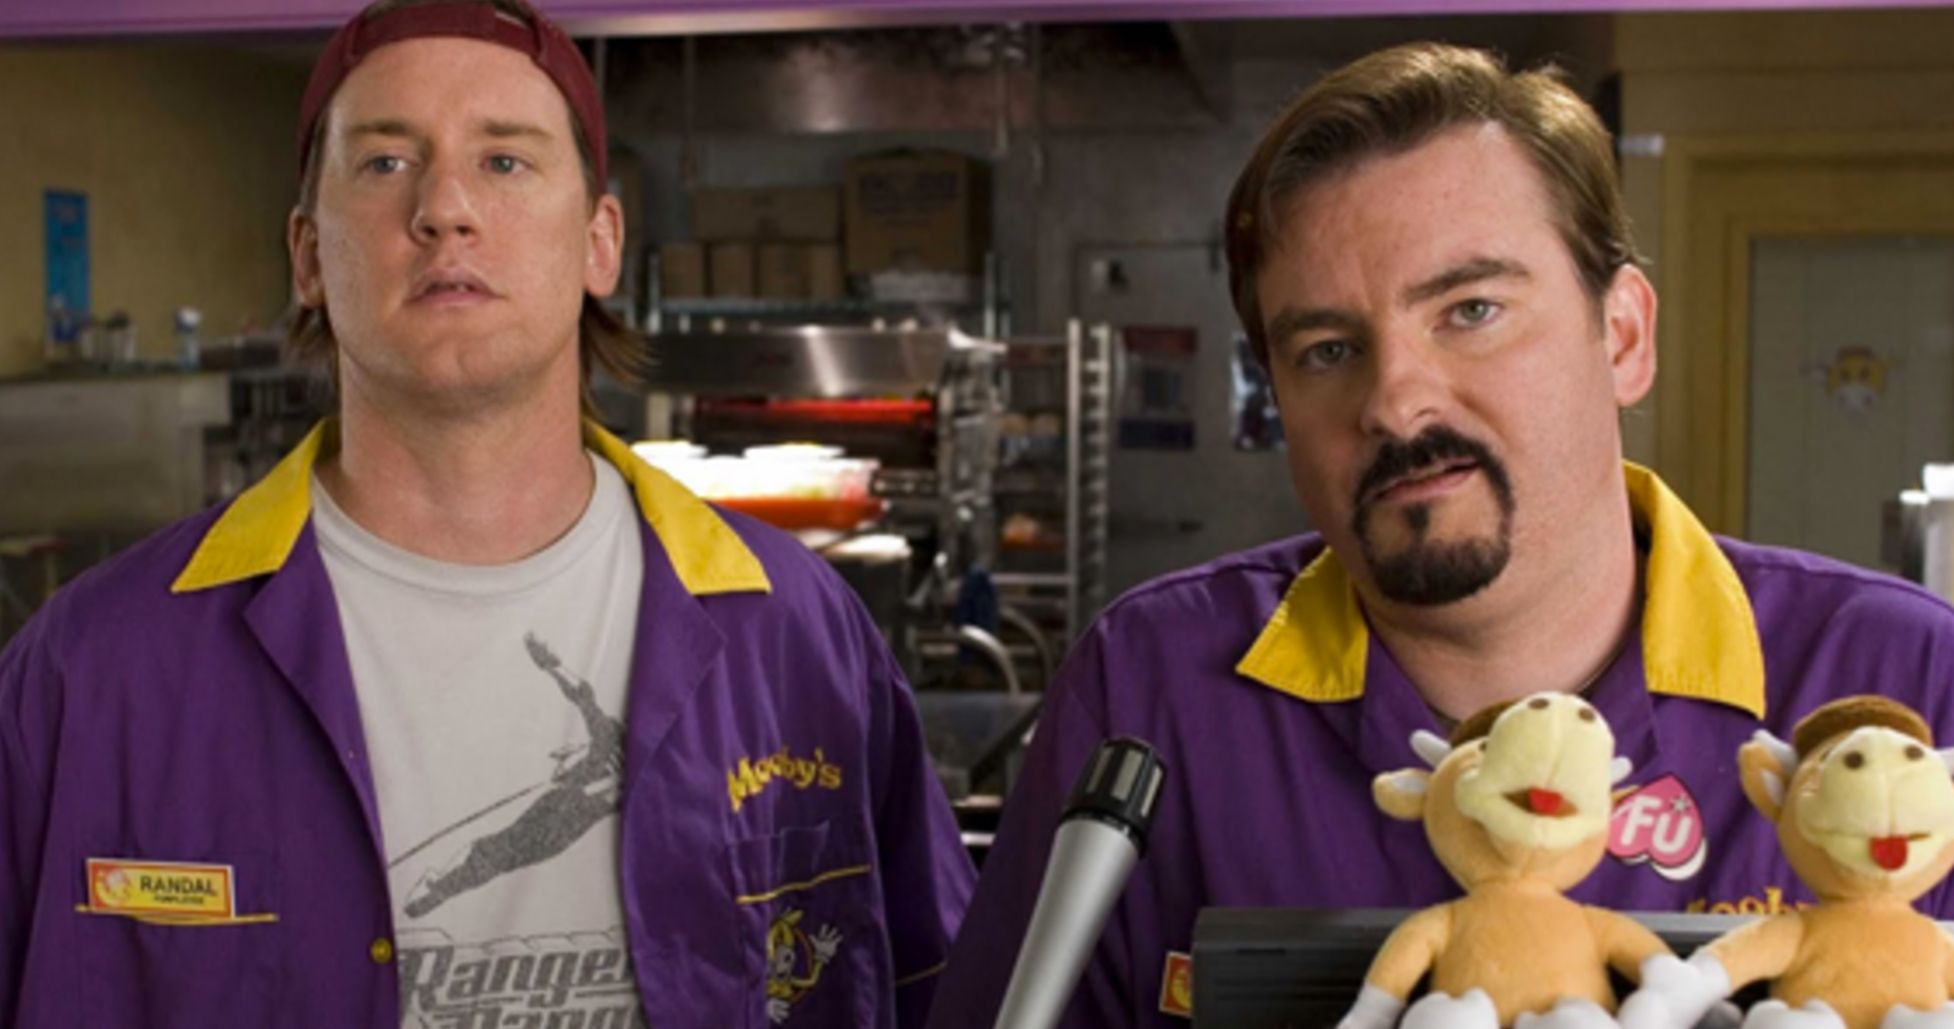 Clerks III Is Based on Kevin Smith's Real-Life Heart Attack